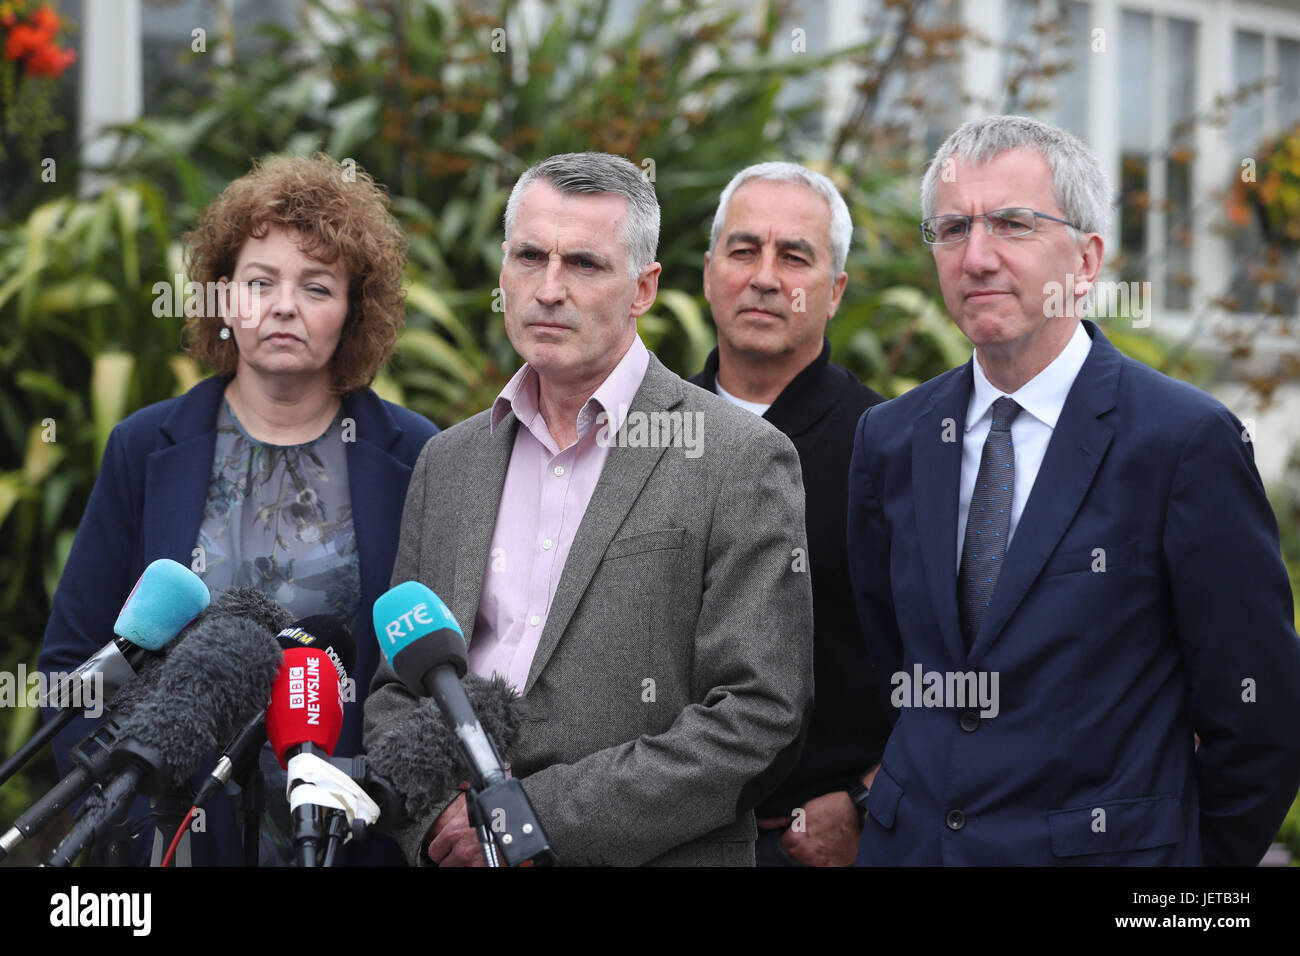 (left to right) Sinn Fein's Caral Ni Chuilin, Declan Kearney, Pat Sheehan and Mairtin O Muilleoir speak to the media outside Stormont castle as round-table all-party talks aimed at resurrecting political powersharing continues. Stock Photo